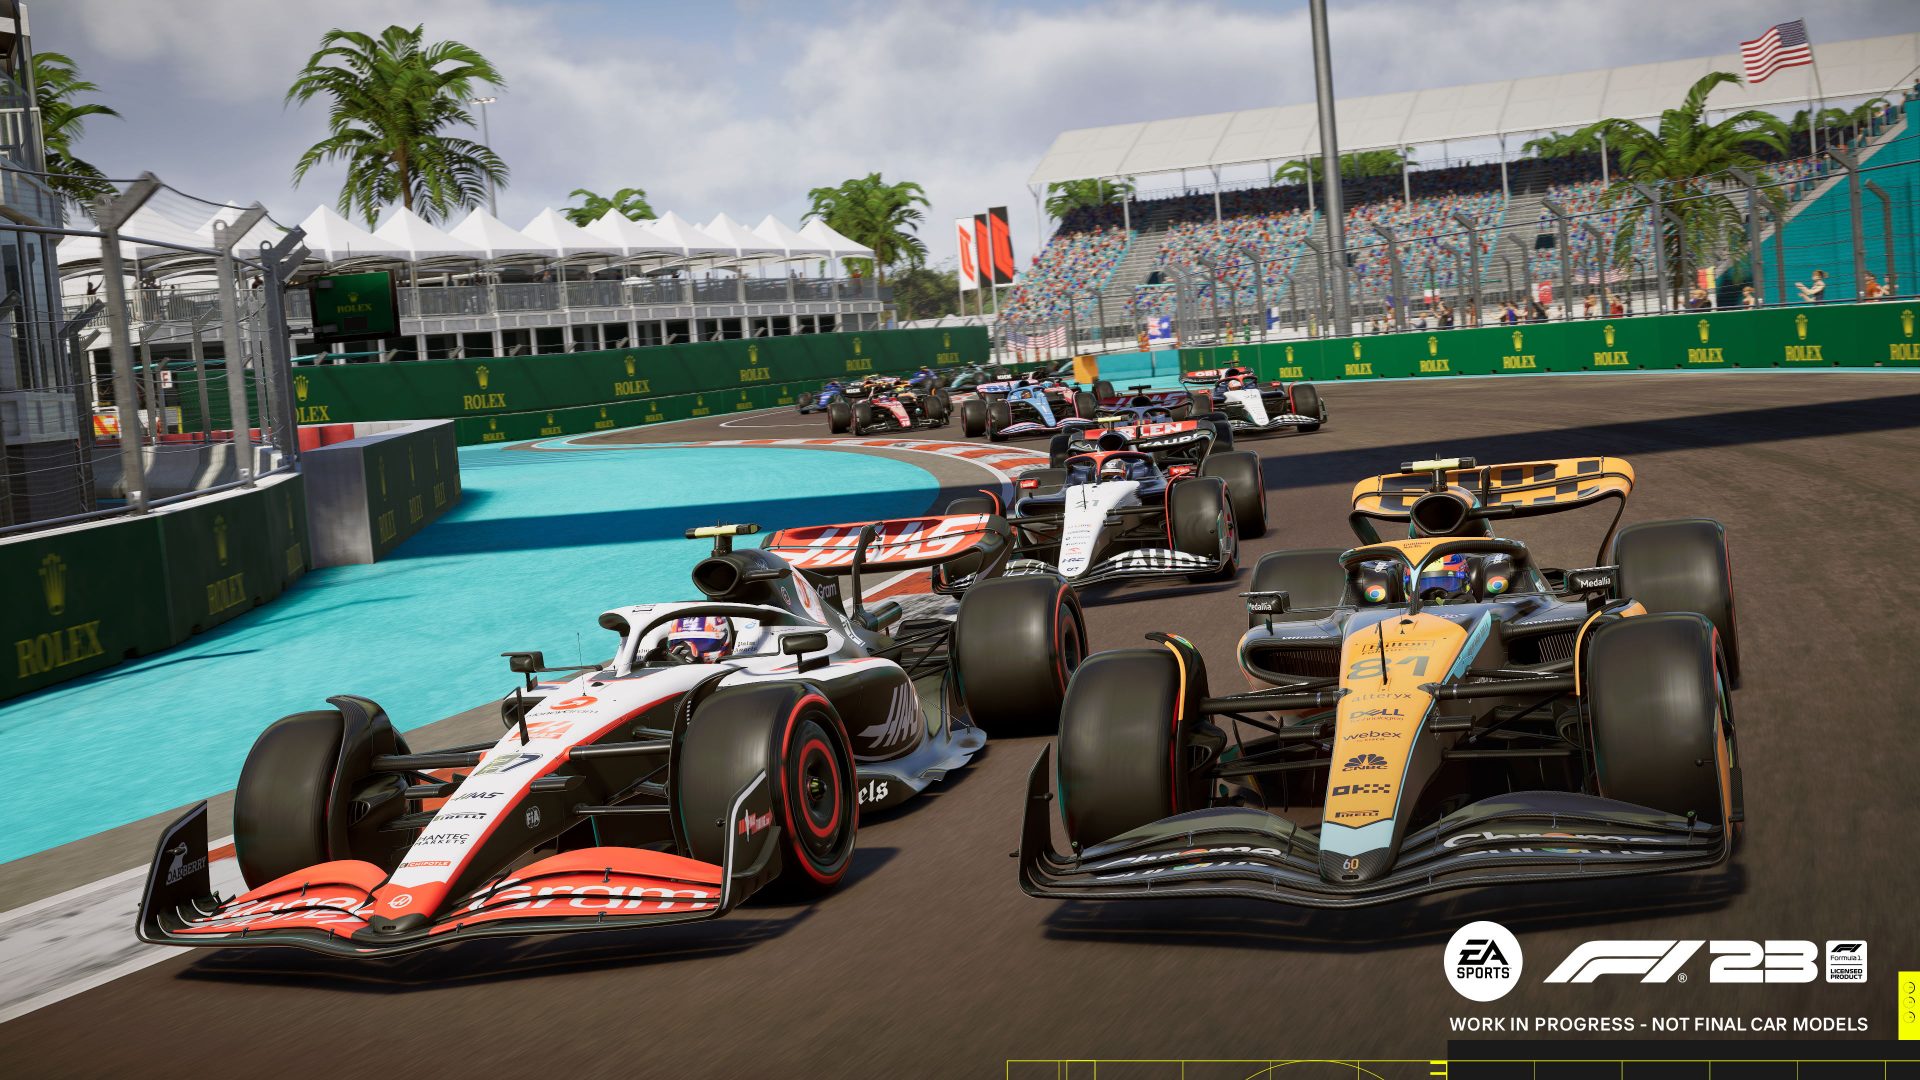 F1 23 Release Date, F1 World, Red Flags, Trailer & More Revealed